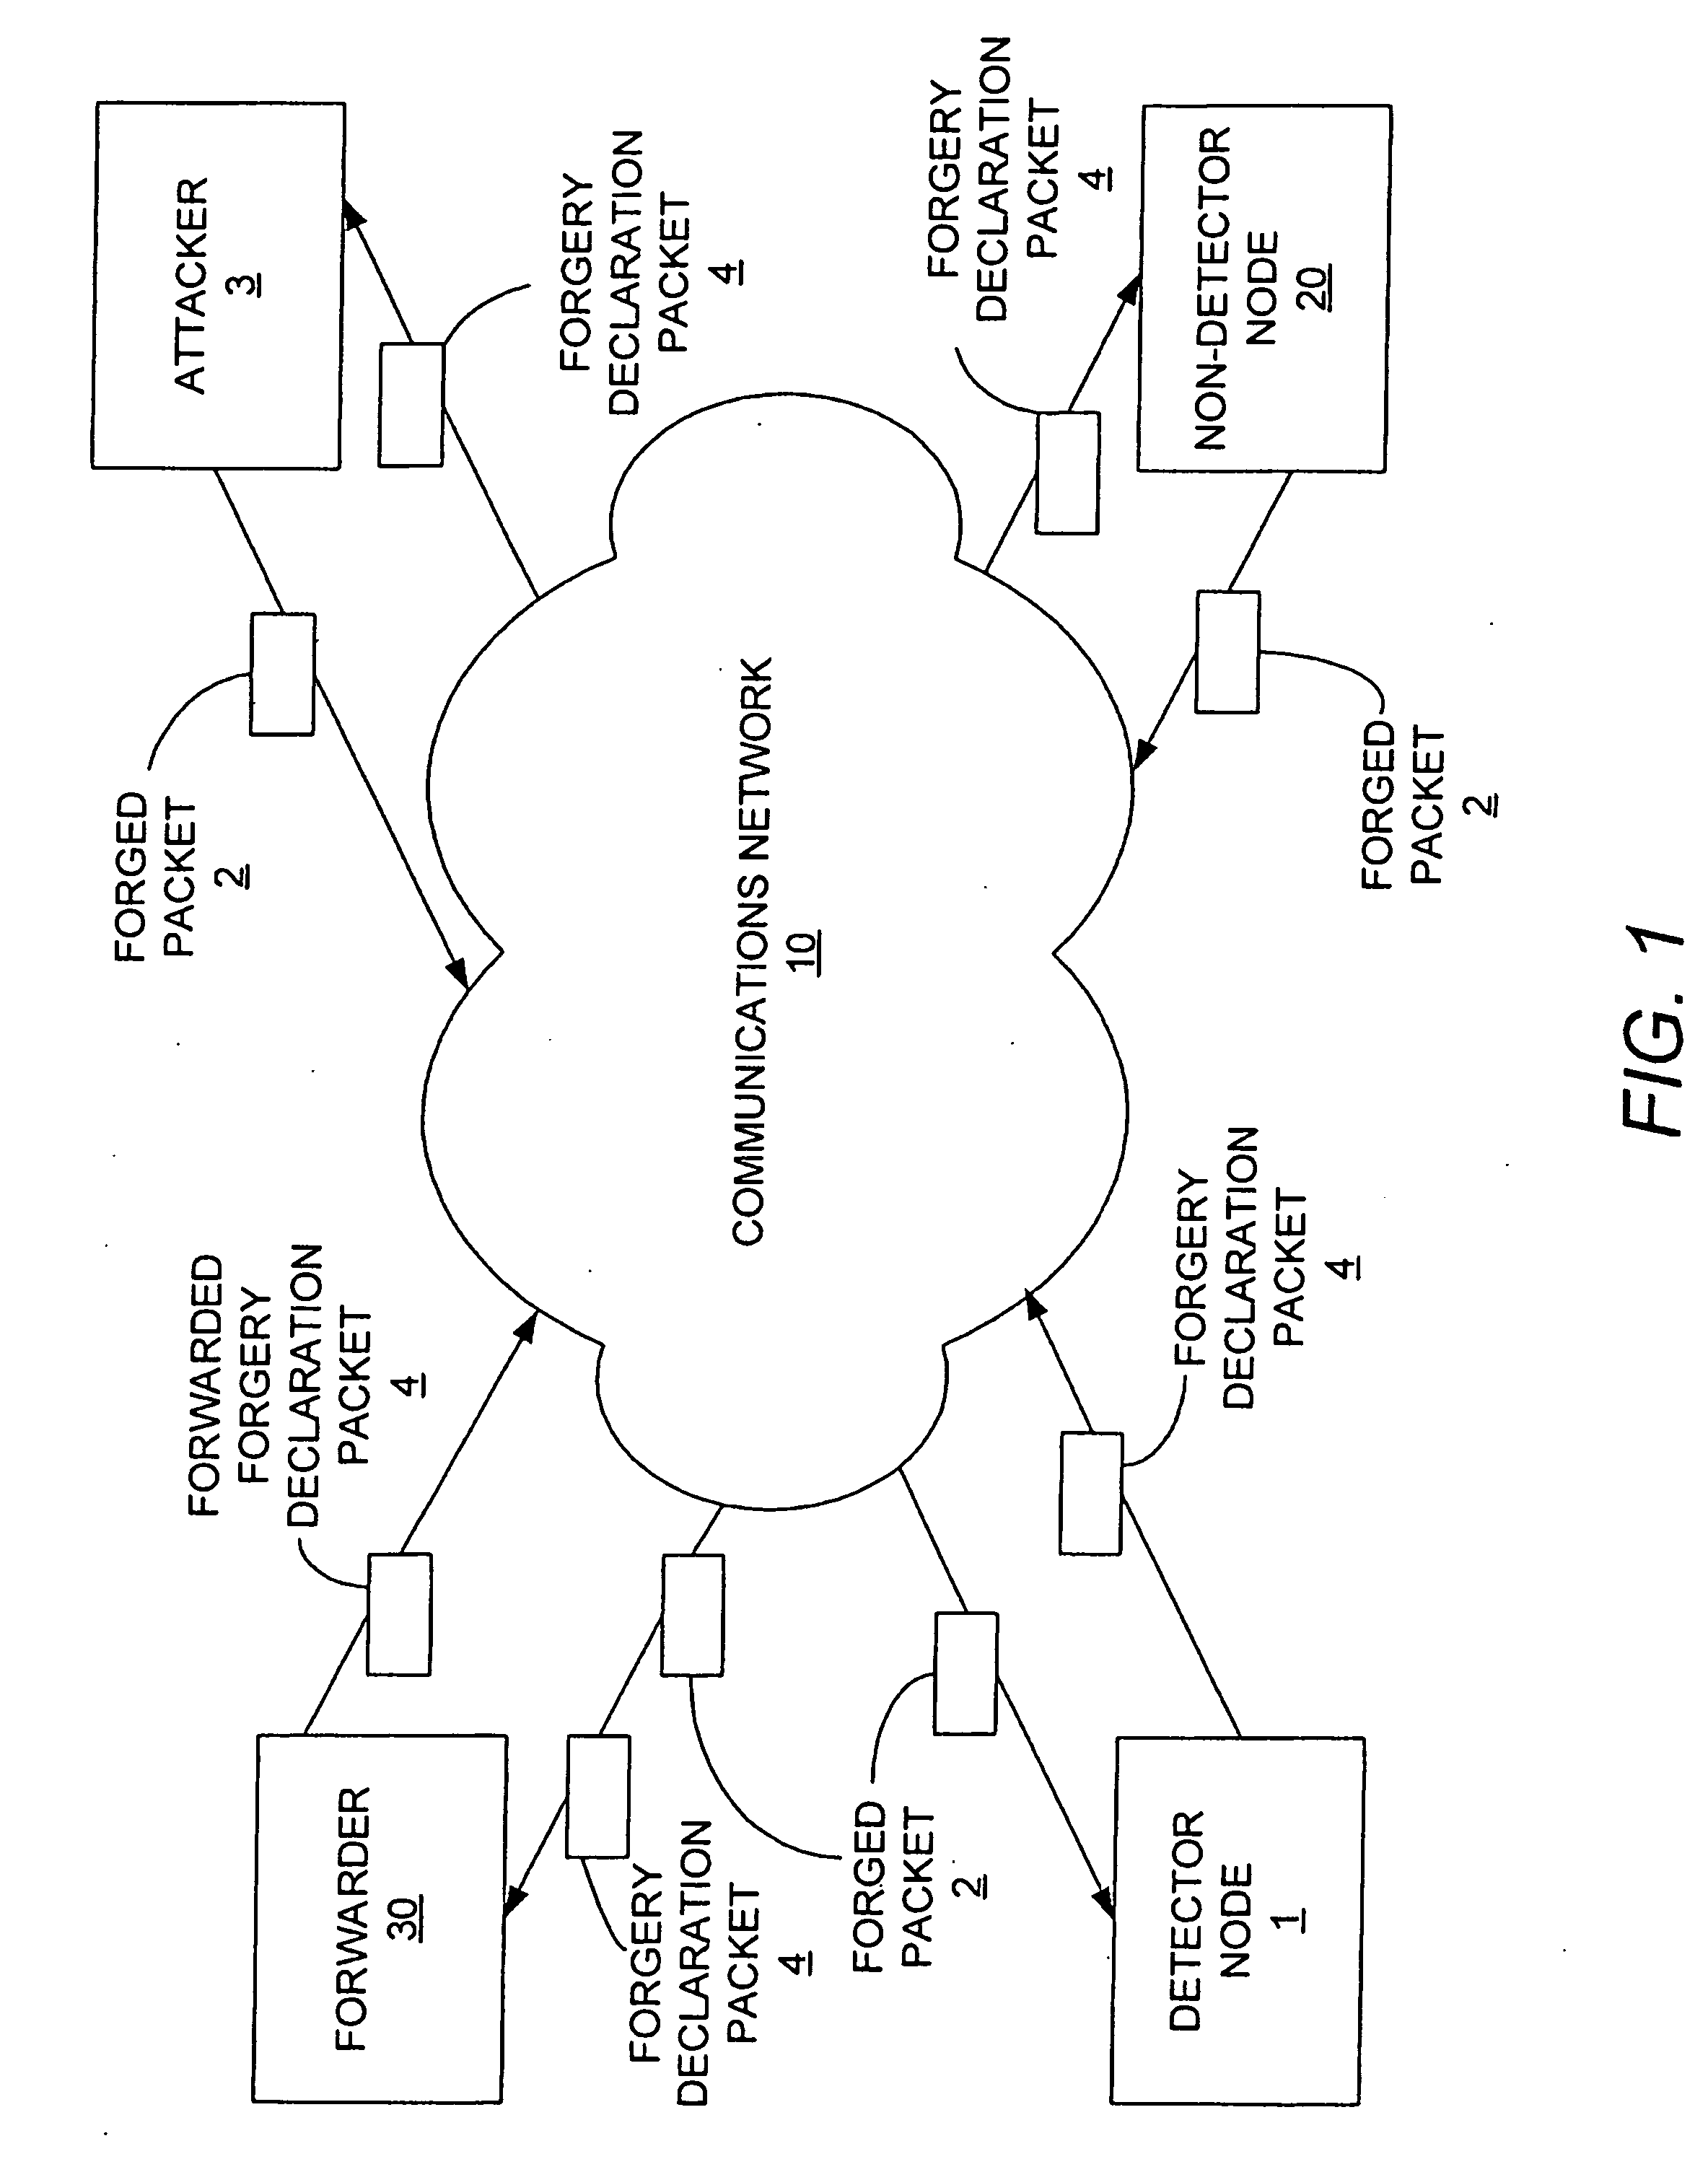 Methods, apparatuses and computer programs for protecting networks against attacks that use forged messages